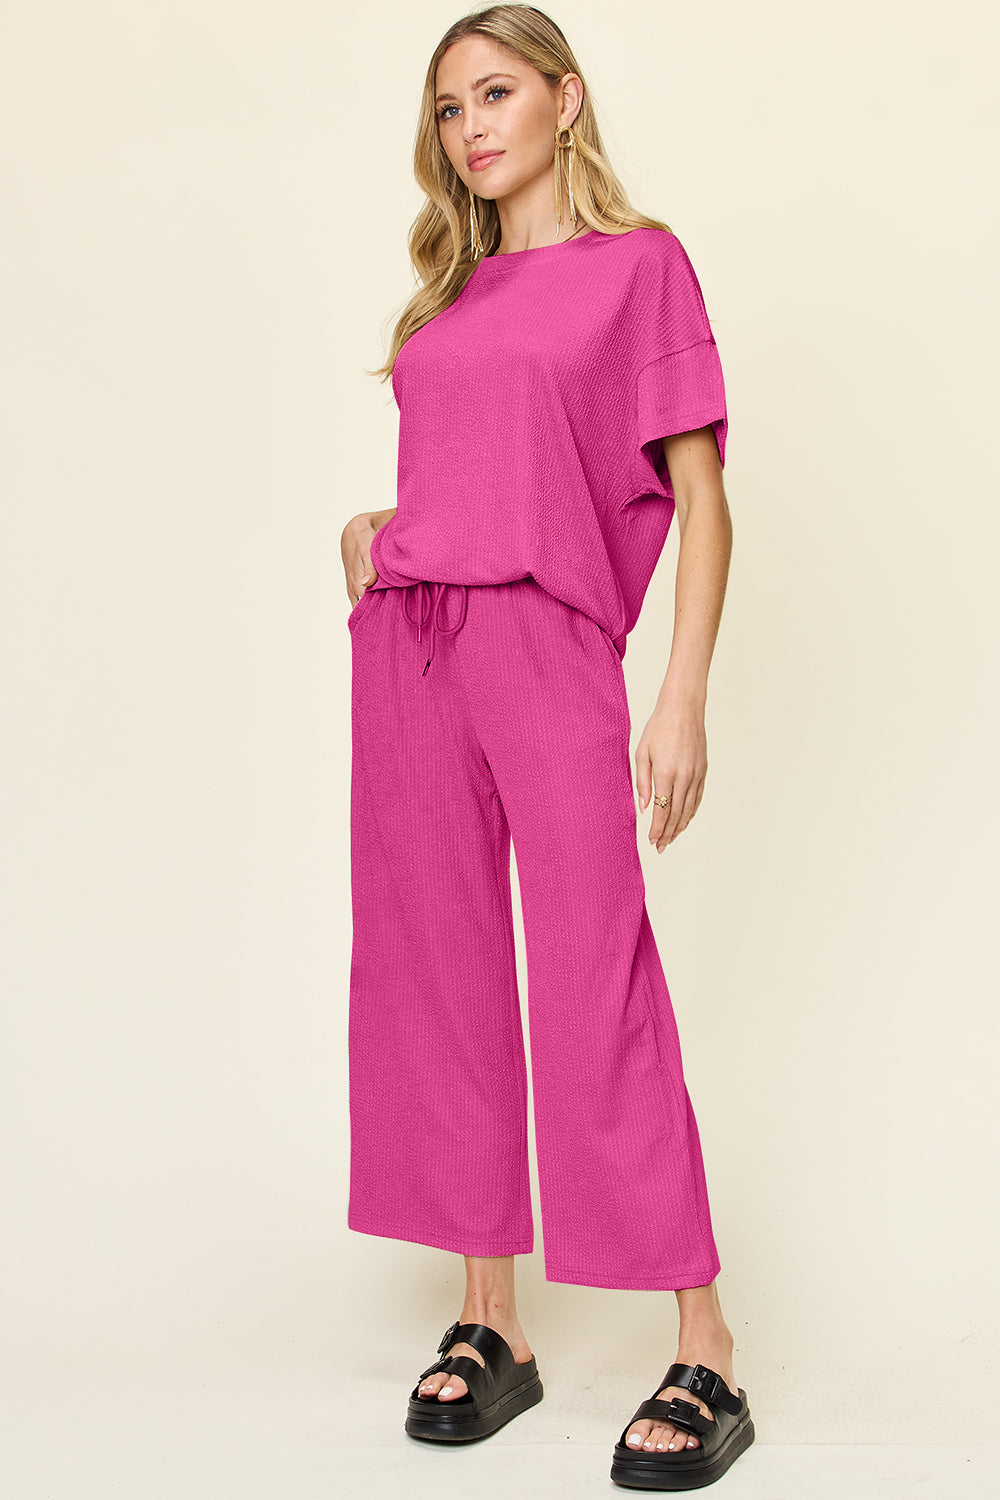 Explore More Collection - Double Take Full Size Texture Round Neck Short Sleeve T-Shirt and Wide Leg Pants